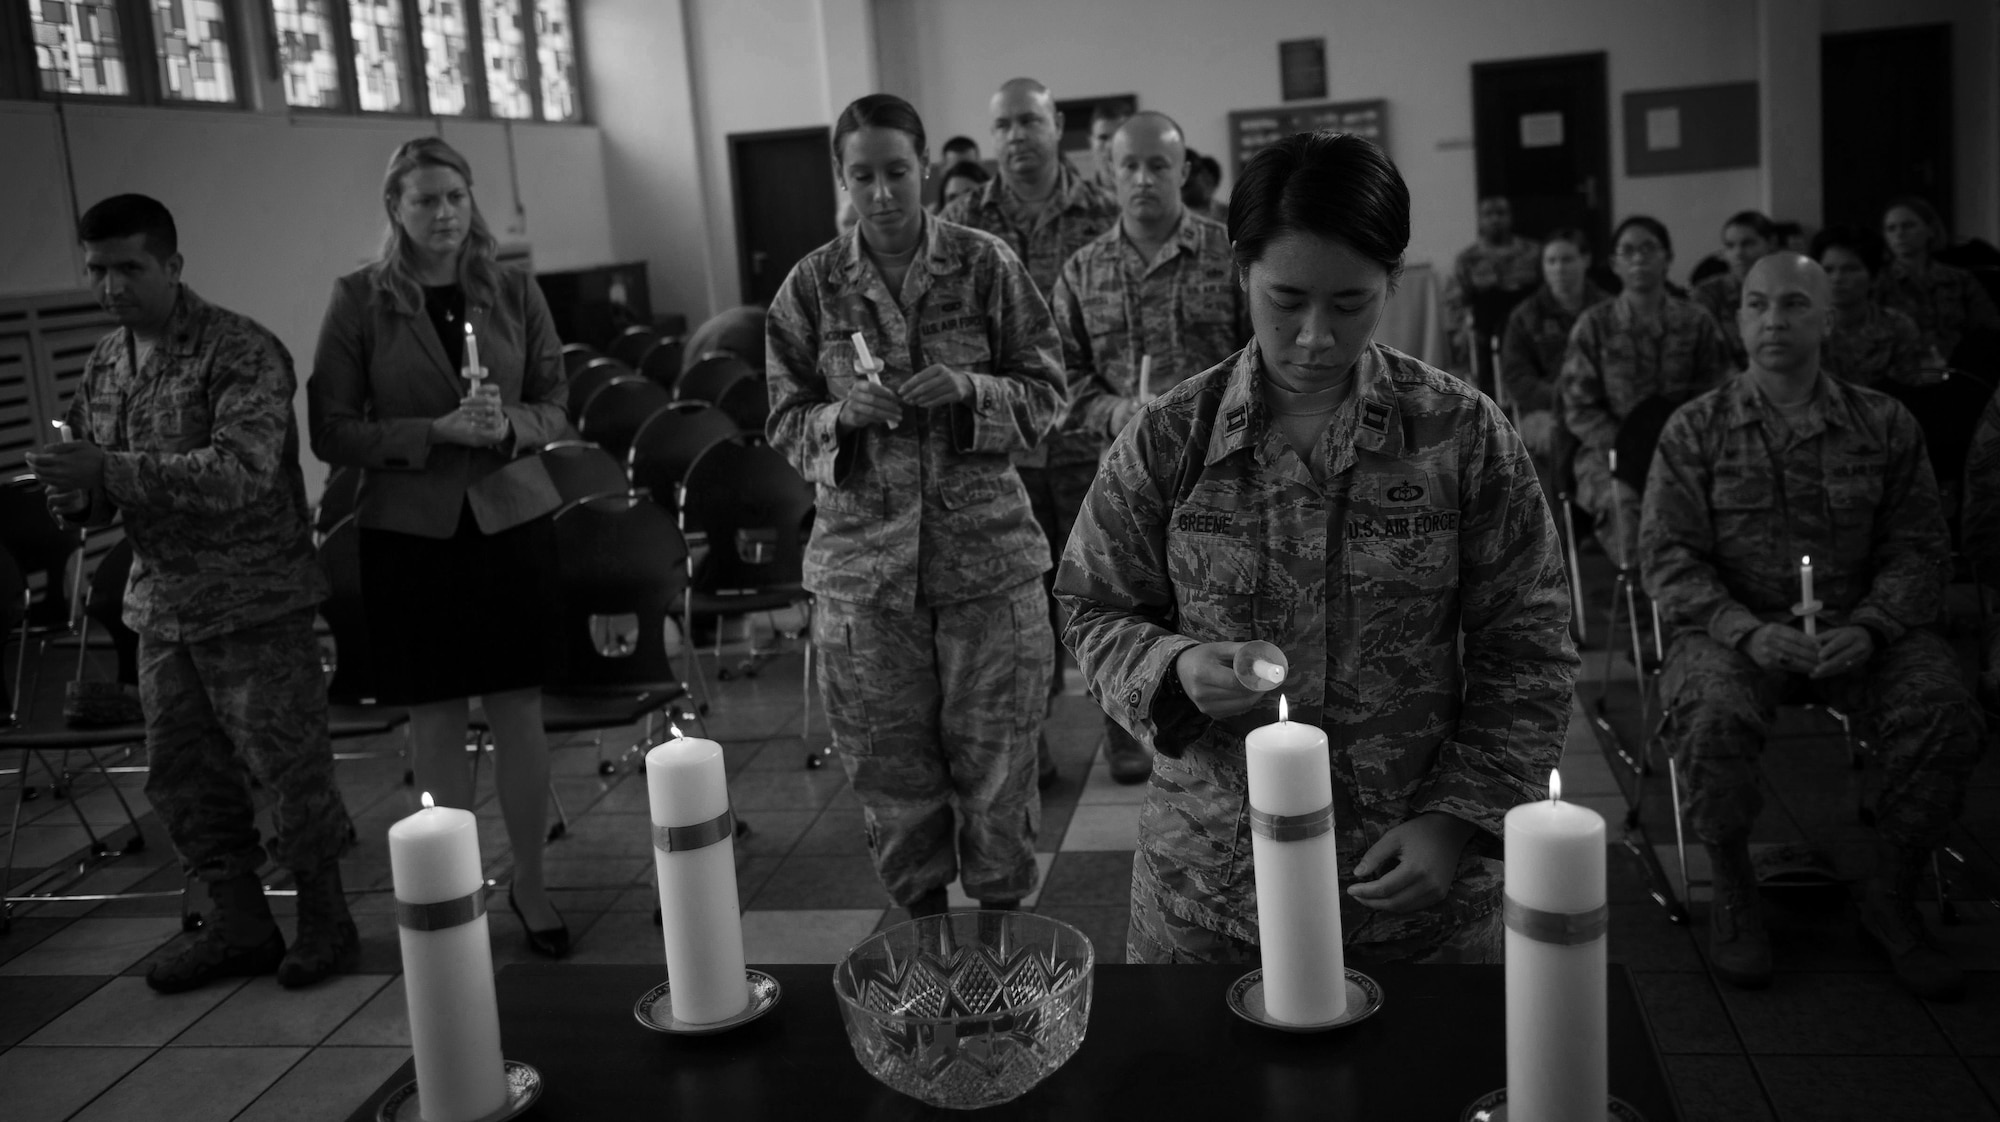 An Airman lights her candle in honor of a victim of interpersonal violence during a candlelight vigil at Ramstein Air Base, Germany, Oct. 27, 2016. According to the Center for Disease Control and Prevention, over the course of a year, more than 10 million U.S. citizens are victims of domestic violence, sexual abuse, child violence and bullying or suicide. The devastating physical, emotional, and psychological consequences of interpersonal violence can cross generations and last lifetimes. (U.S. Air Force photo by Airman 1st Class Lane T. Plummer)